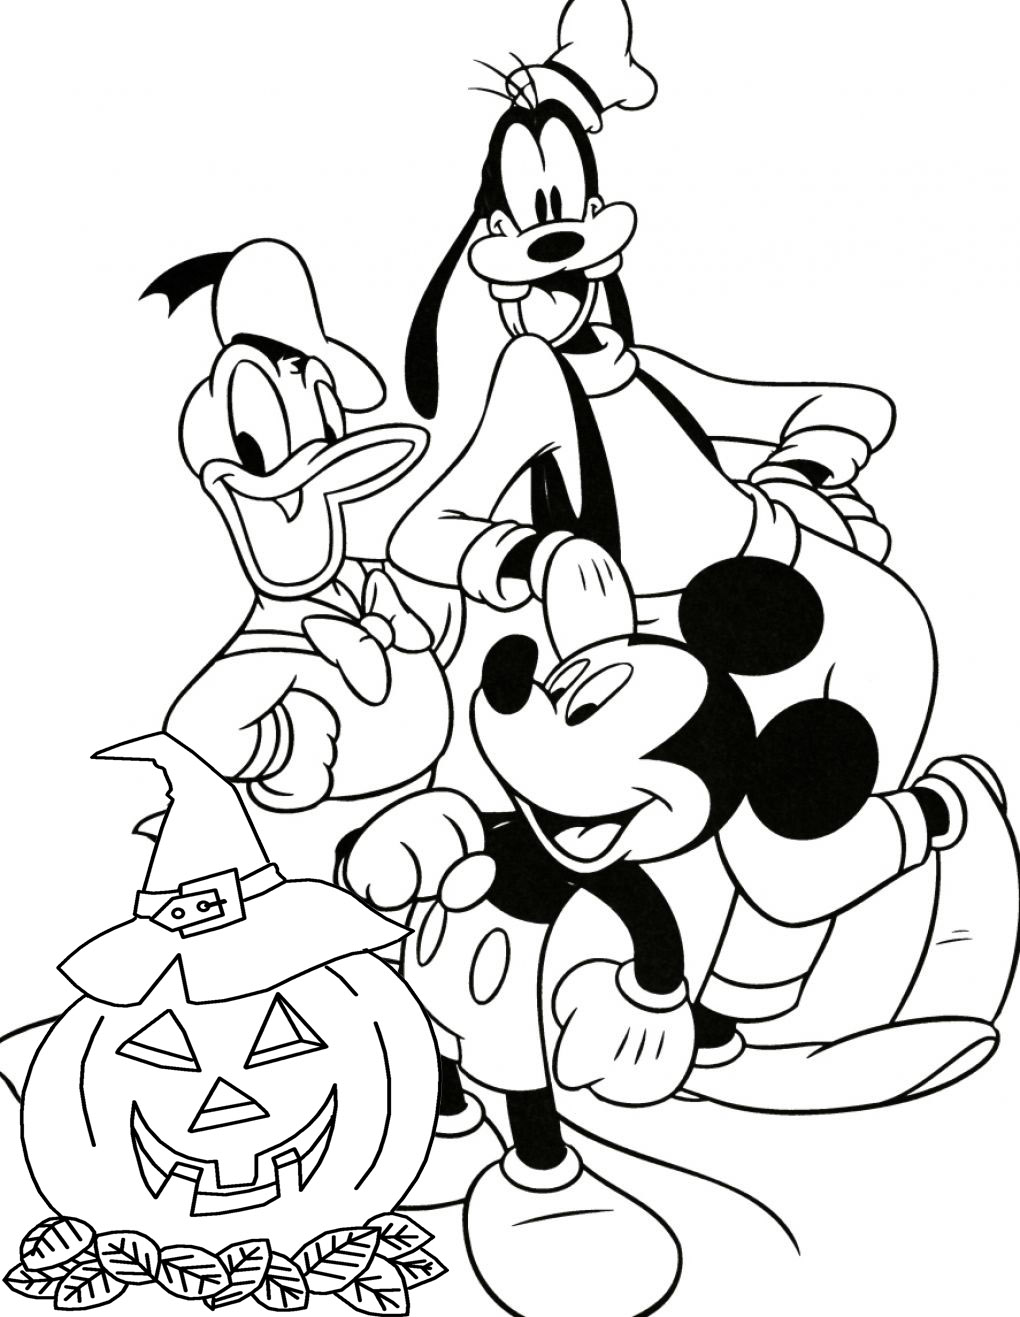 Download Free Disney Halloween Coloring Pages - Lovebugs and Postcards